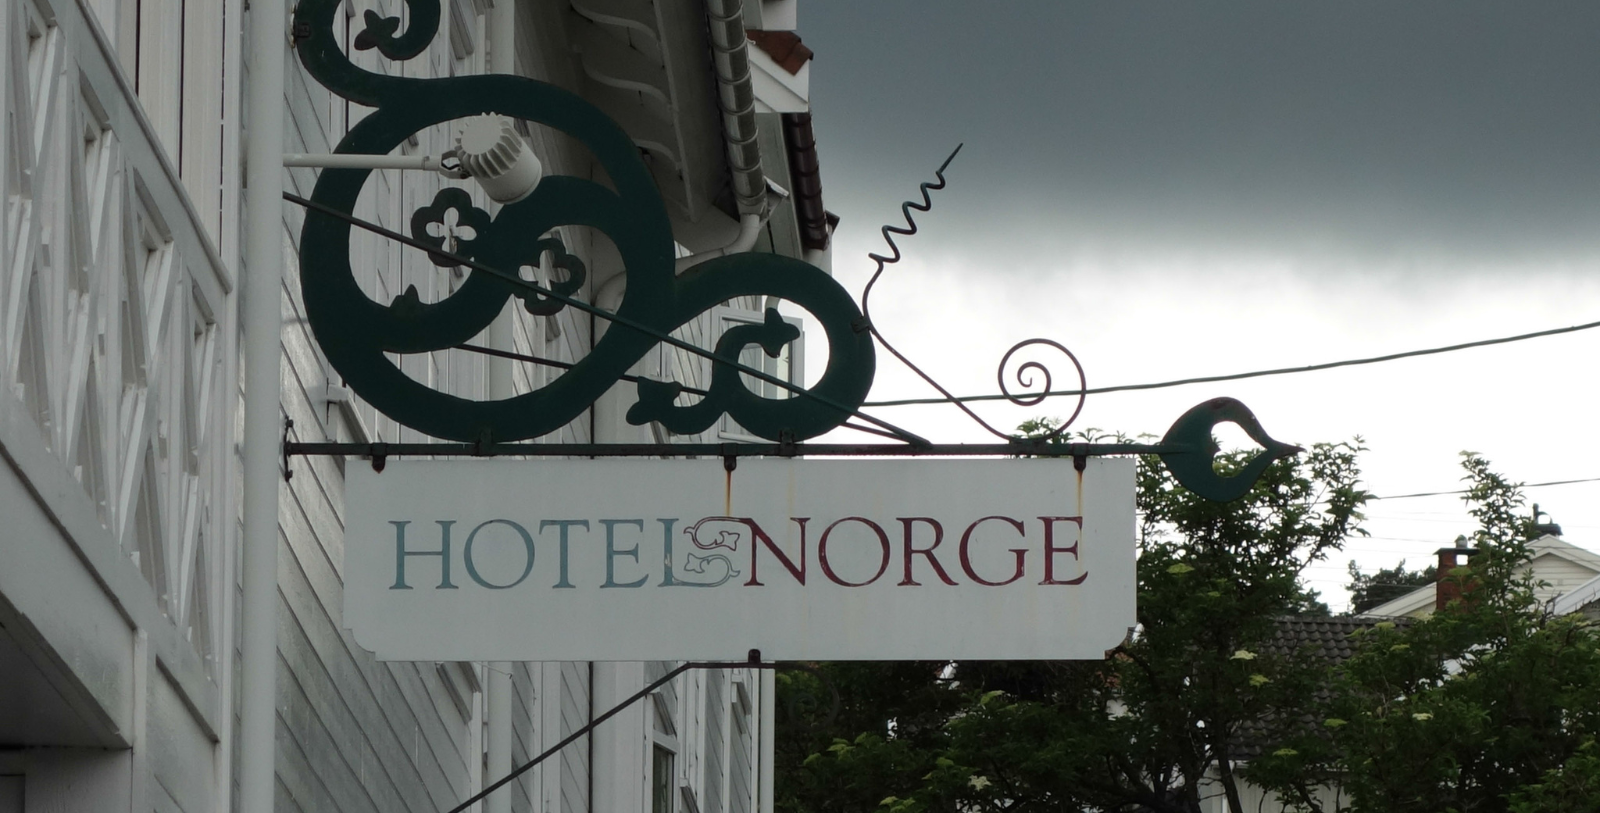 Enjoy the heart of Lillesand at the family-run Lillesand Hotel Norge.